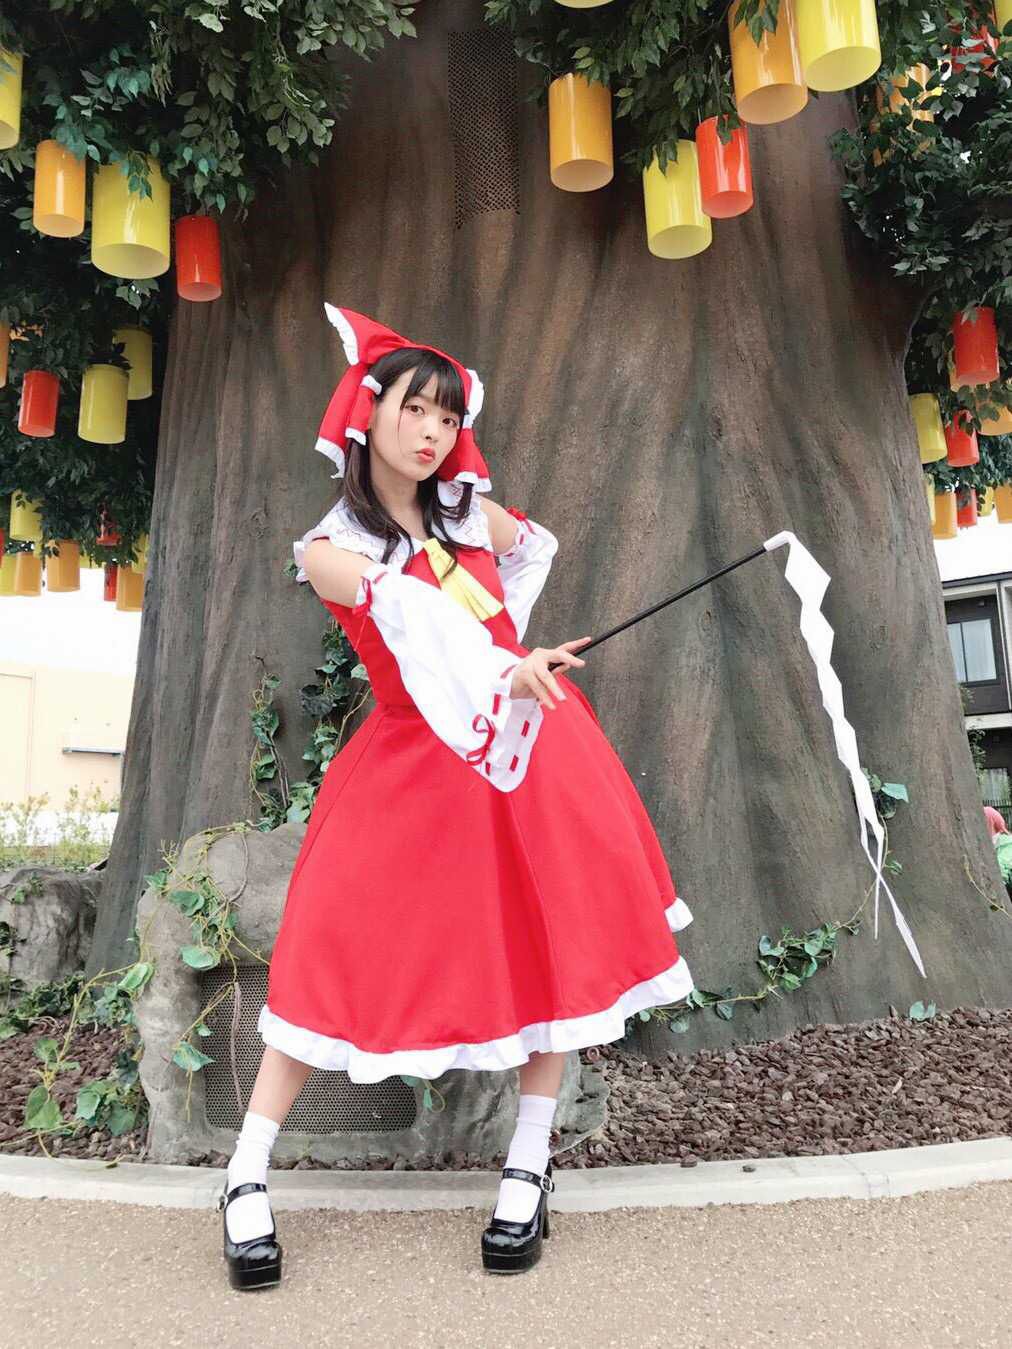 [Image] Sumire Kousaka's voice actor, discouraged erotic Reimu cosplay appearance without wwwww 2